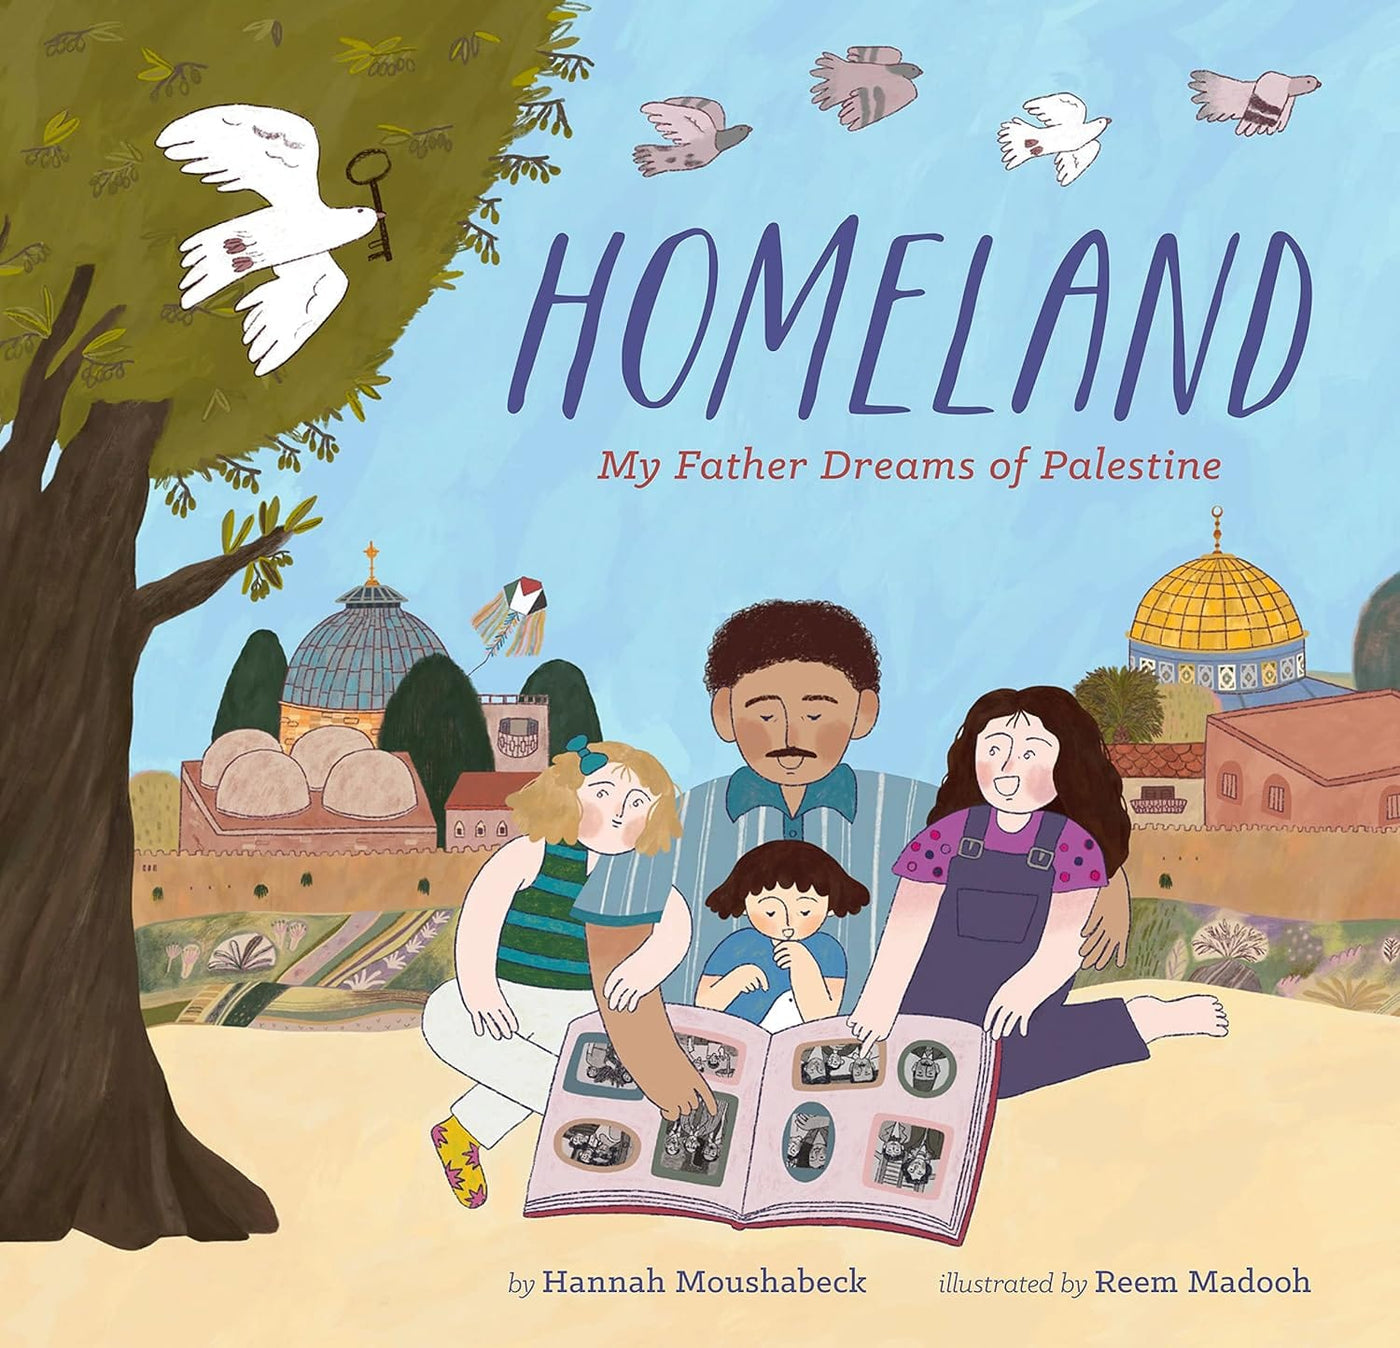 Homeland My Father Dreams of Palestine by Hannah Moushabeck, illustrated by Reem Madooh